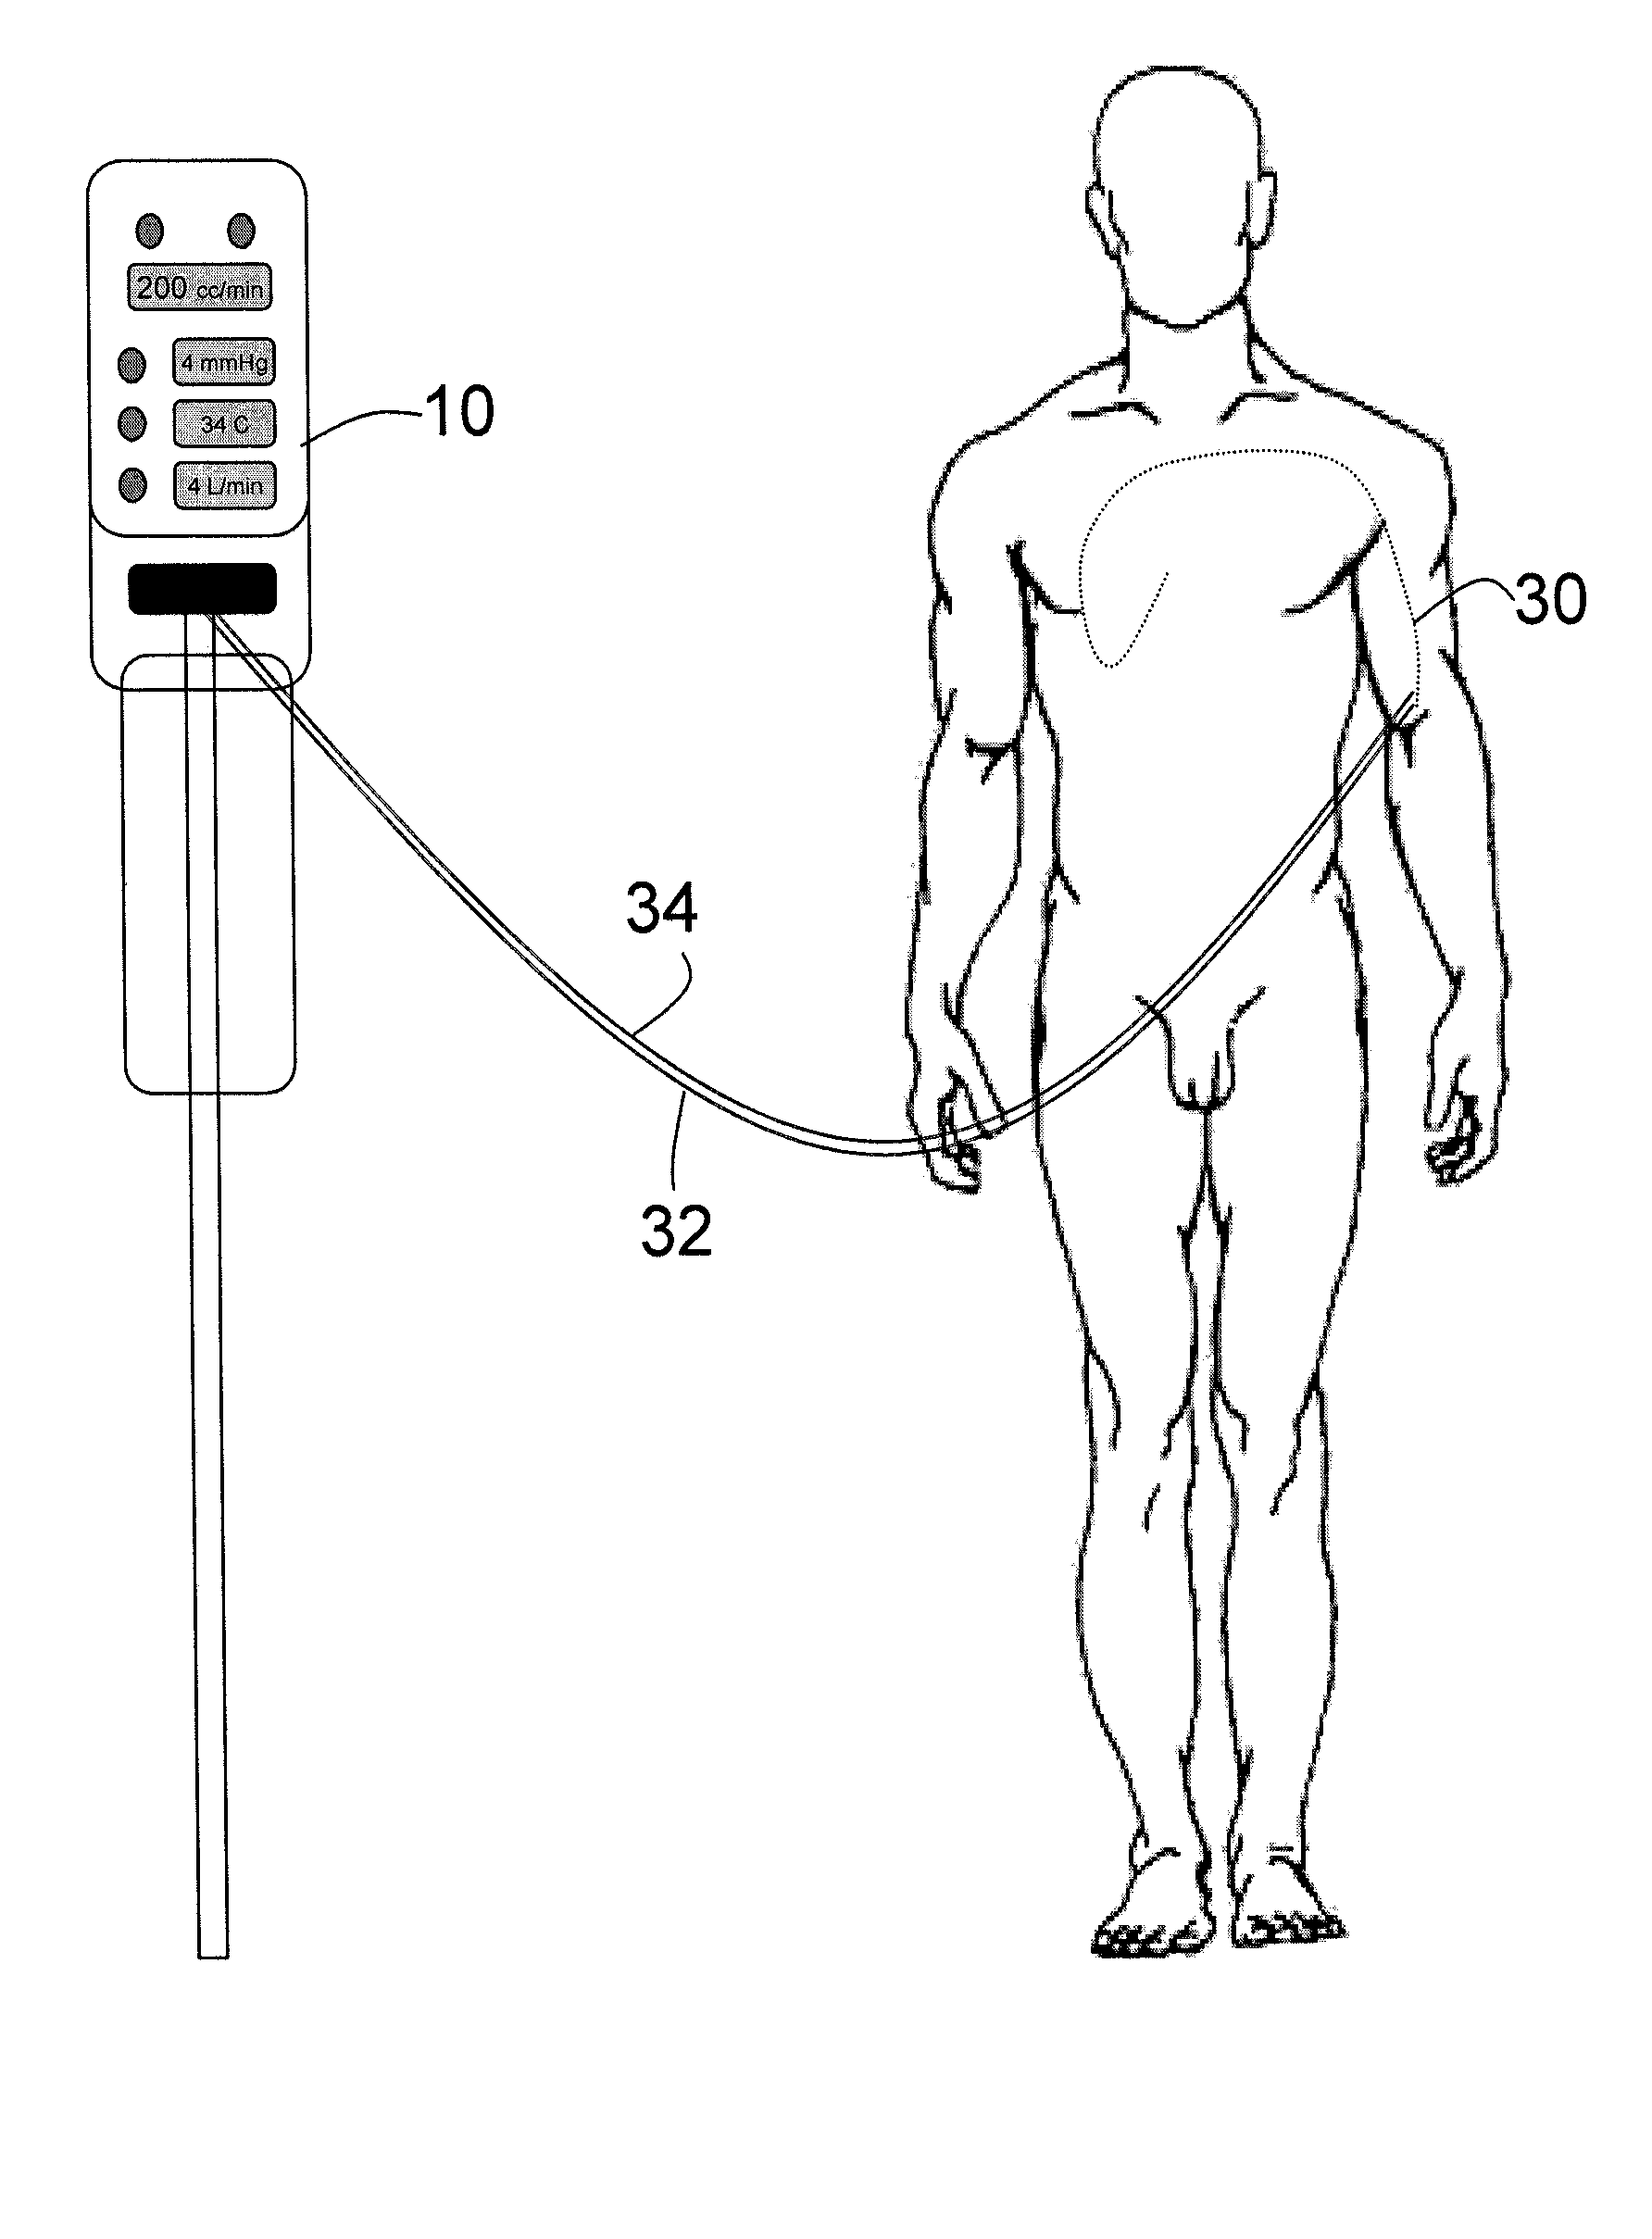 Automated therapy system and method